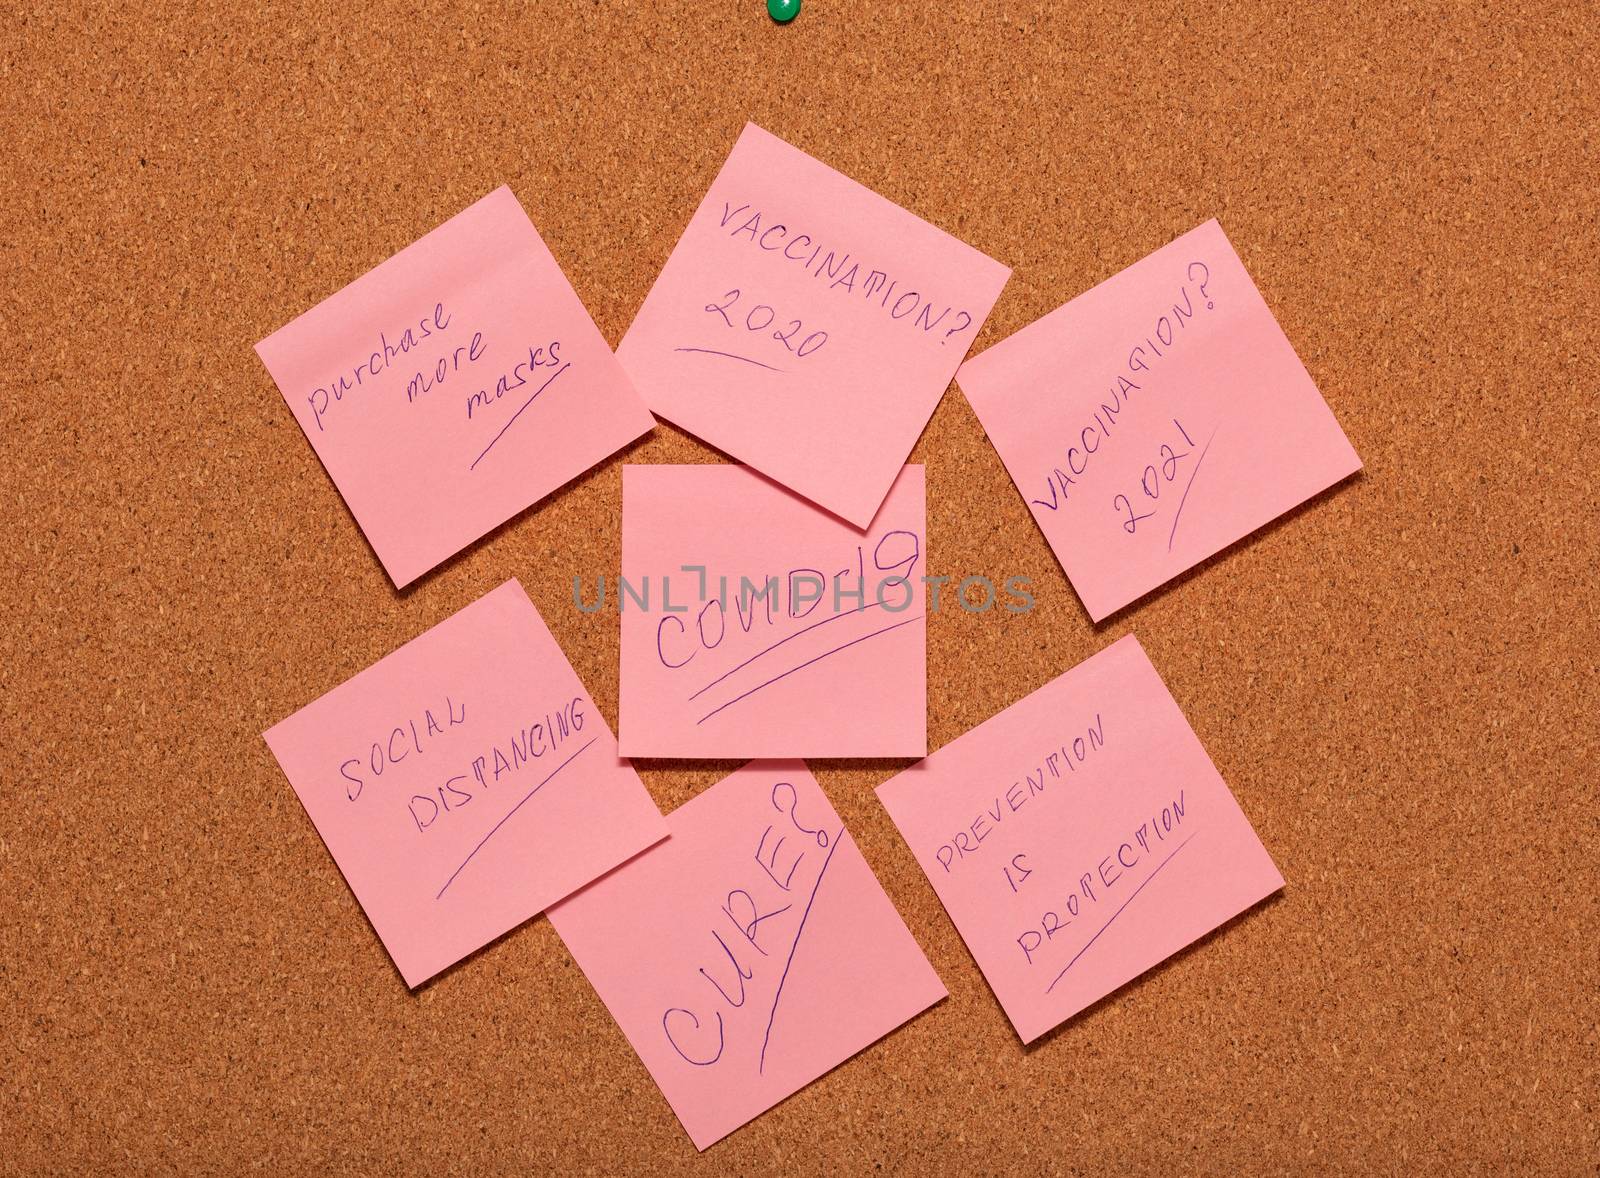 Vaccination 2021?, Vaccination 2020?, Purchase more masks, Social Distancing, Cure?, Prevention is Protection, Covid-19 handwritten words on seven pink stickers in the middle of a cork notice-board. by DamantisZ